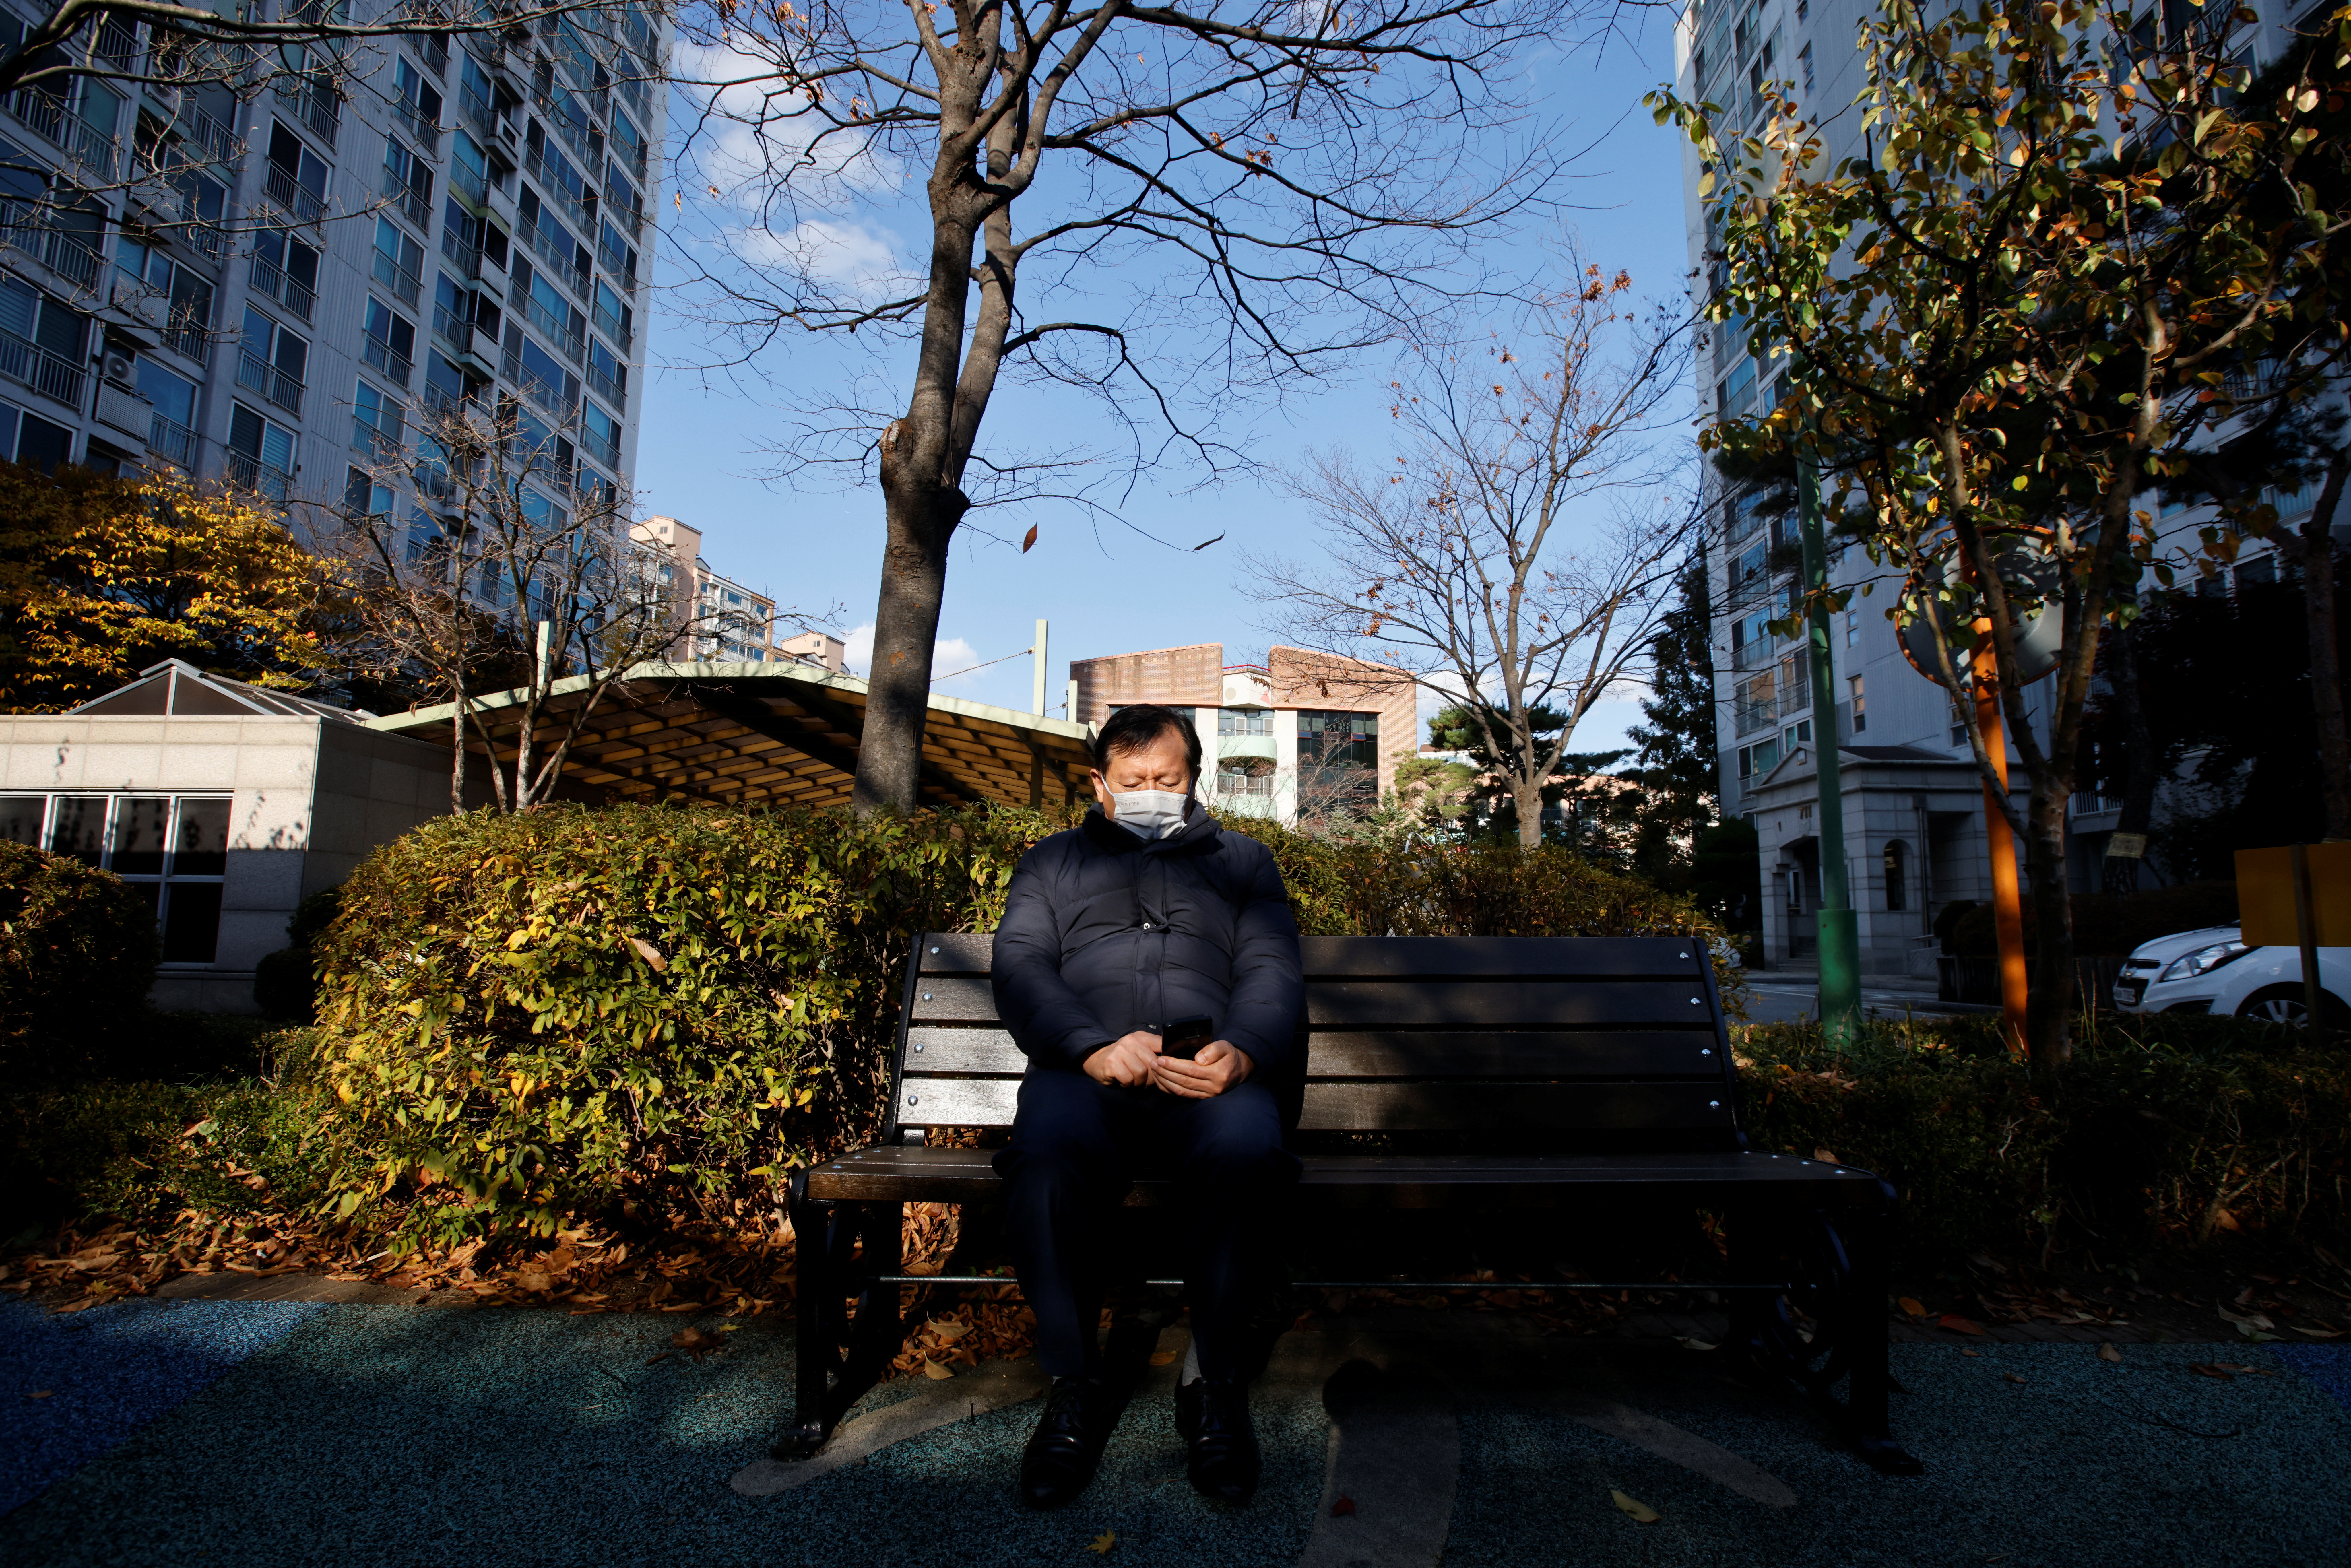 Kim Gwang-ho, a former Hyundai Motor engineer, checks his cellphone in the park in front of his home in Seoul